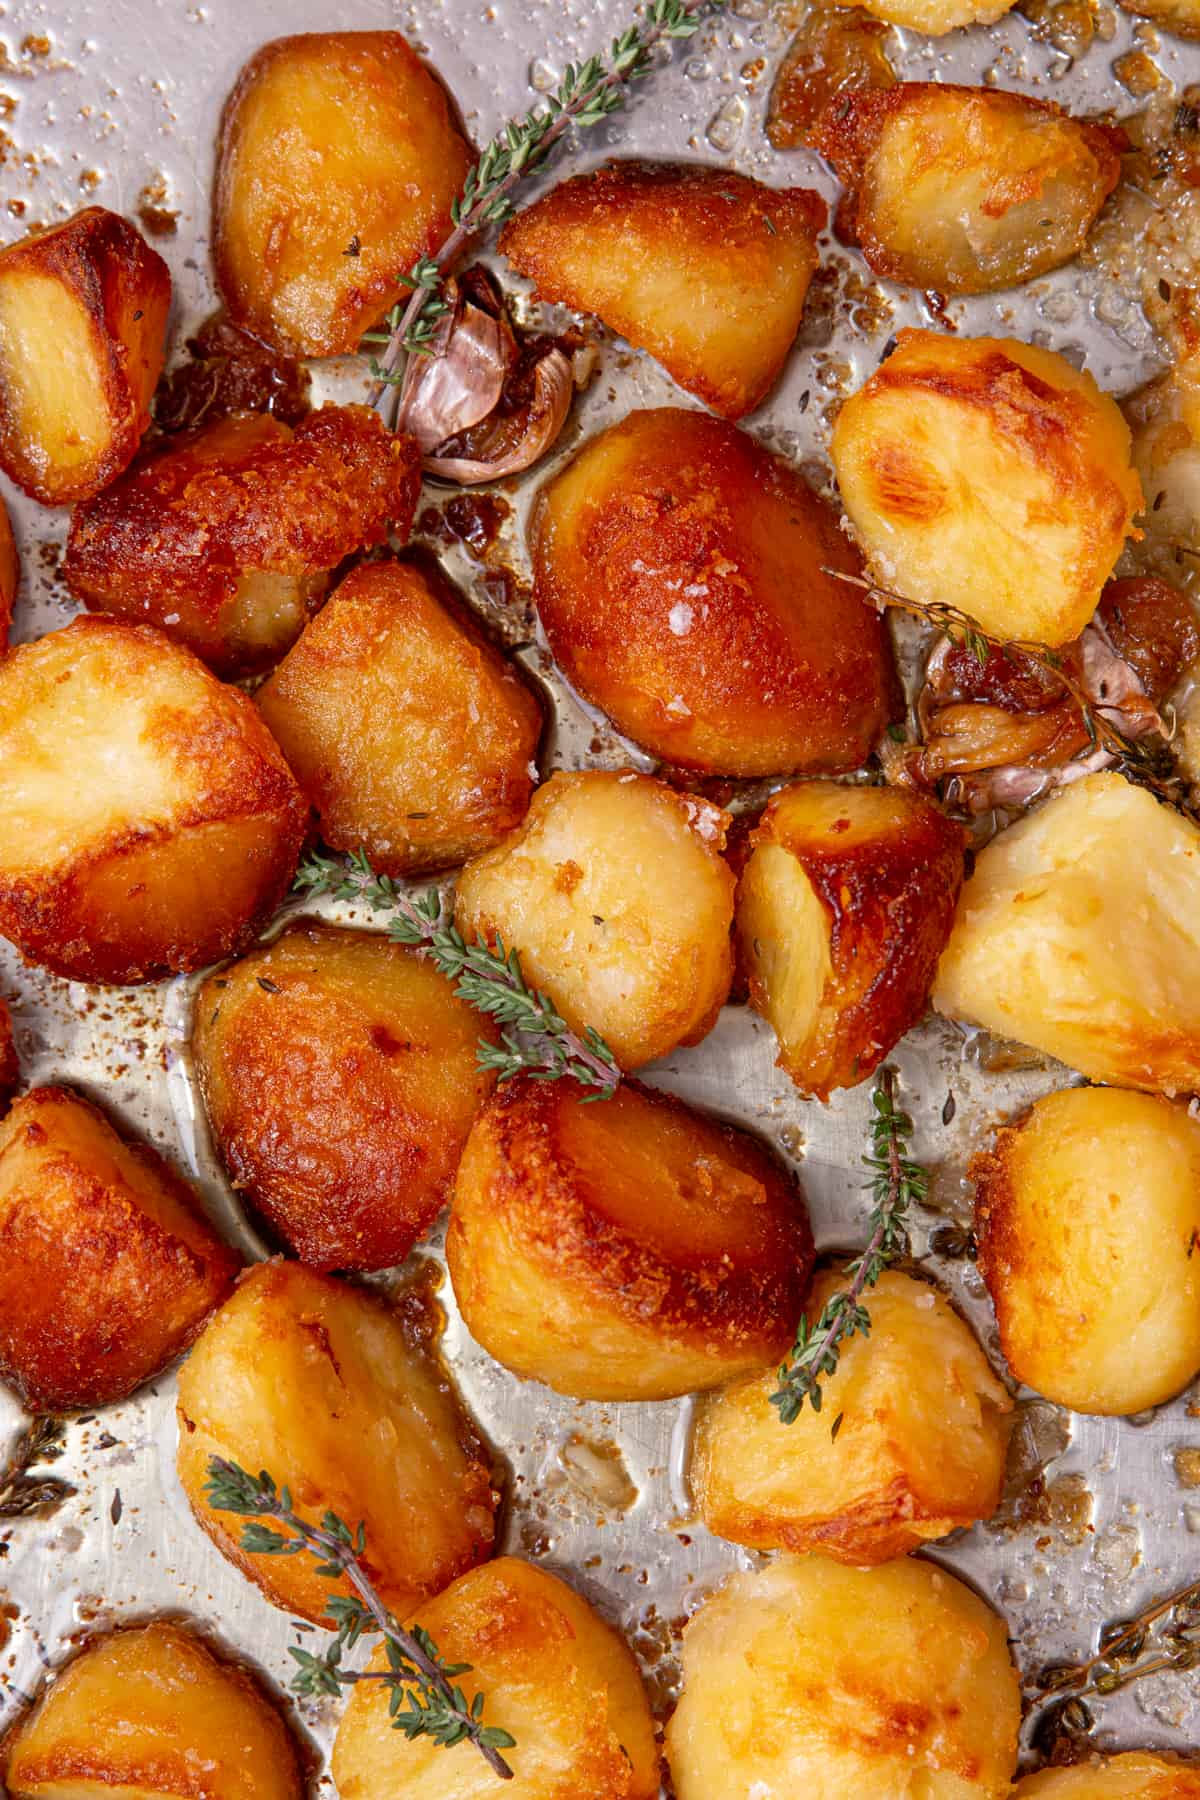 Lots of golden browned roast potatoes on a baking tray with frswsh herbs, salt and garlic.